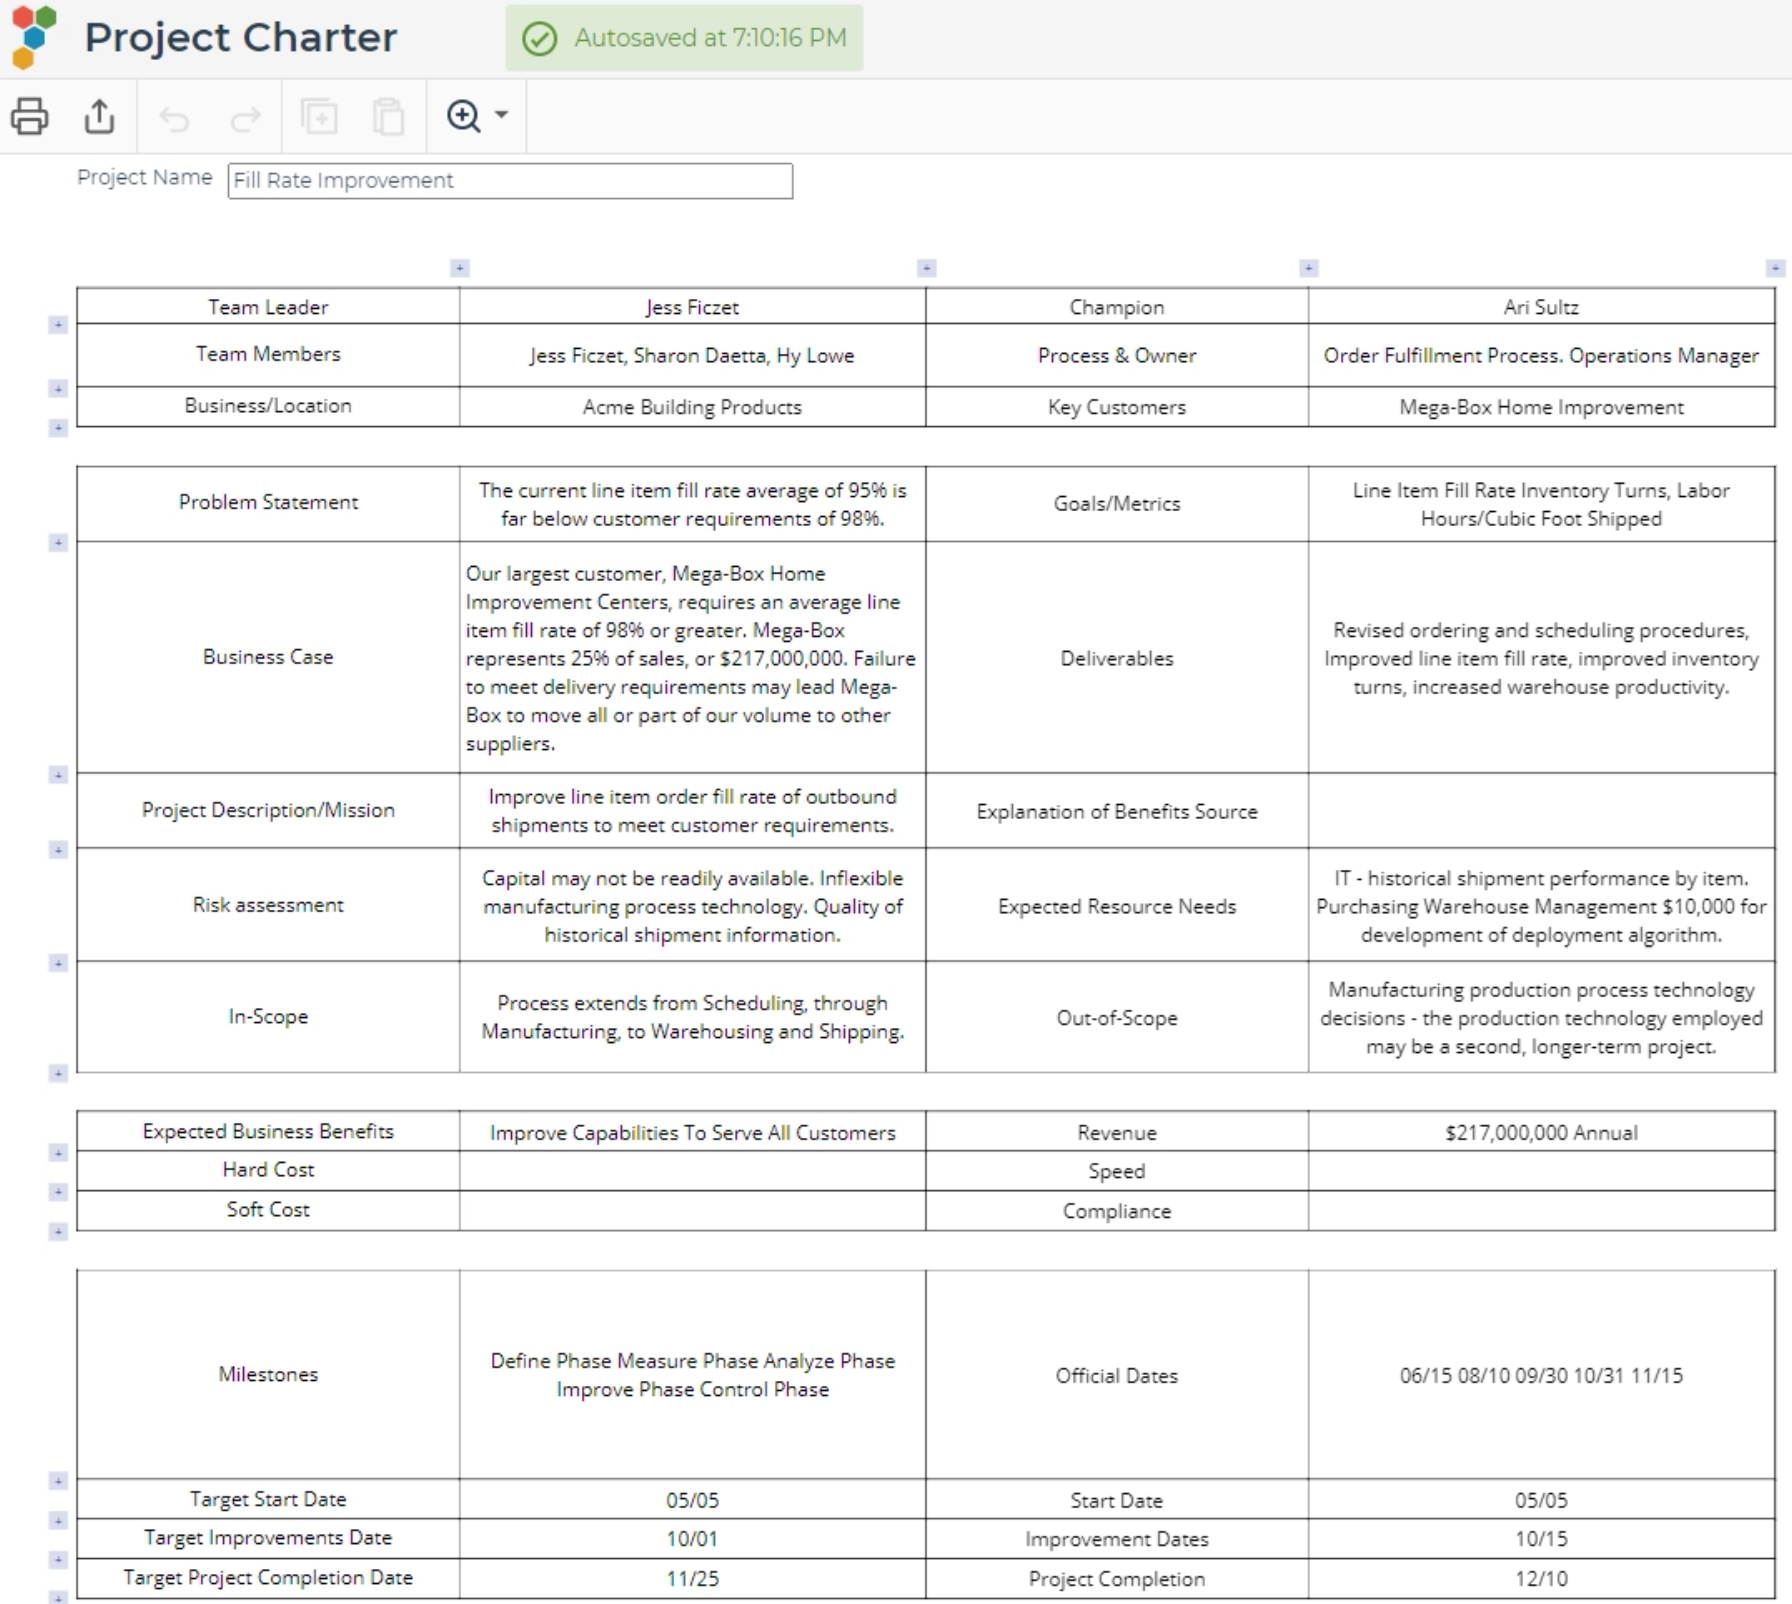 Sample project charter output.